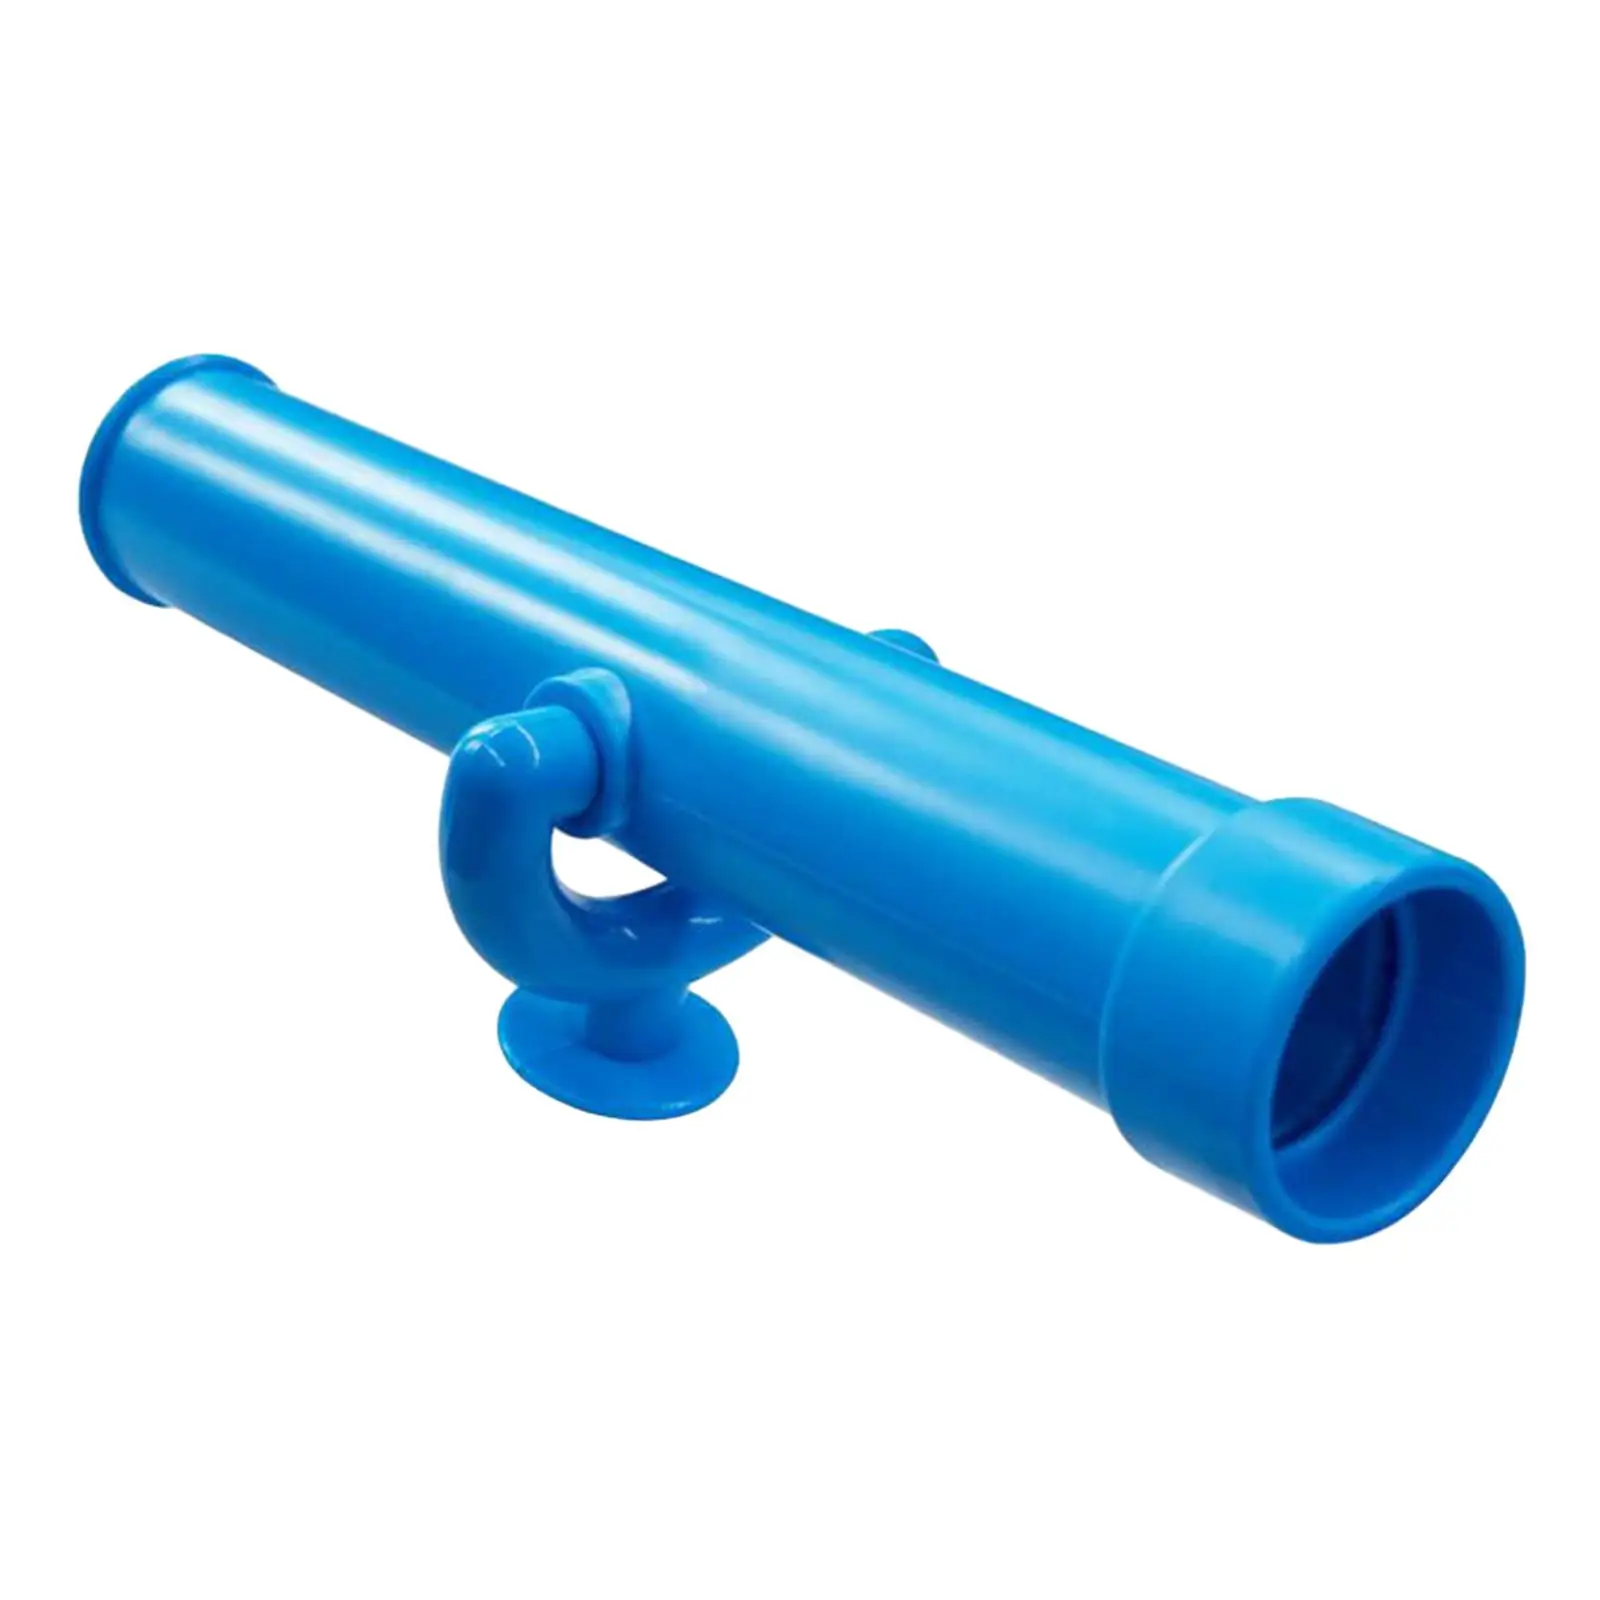 Playground Telescope Toy Playground Accessories Science Toy for Kids Pirate